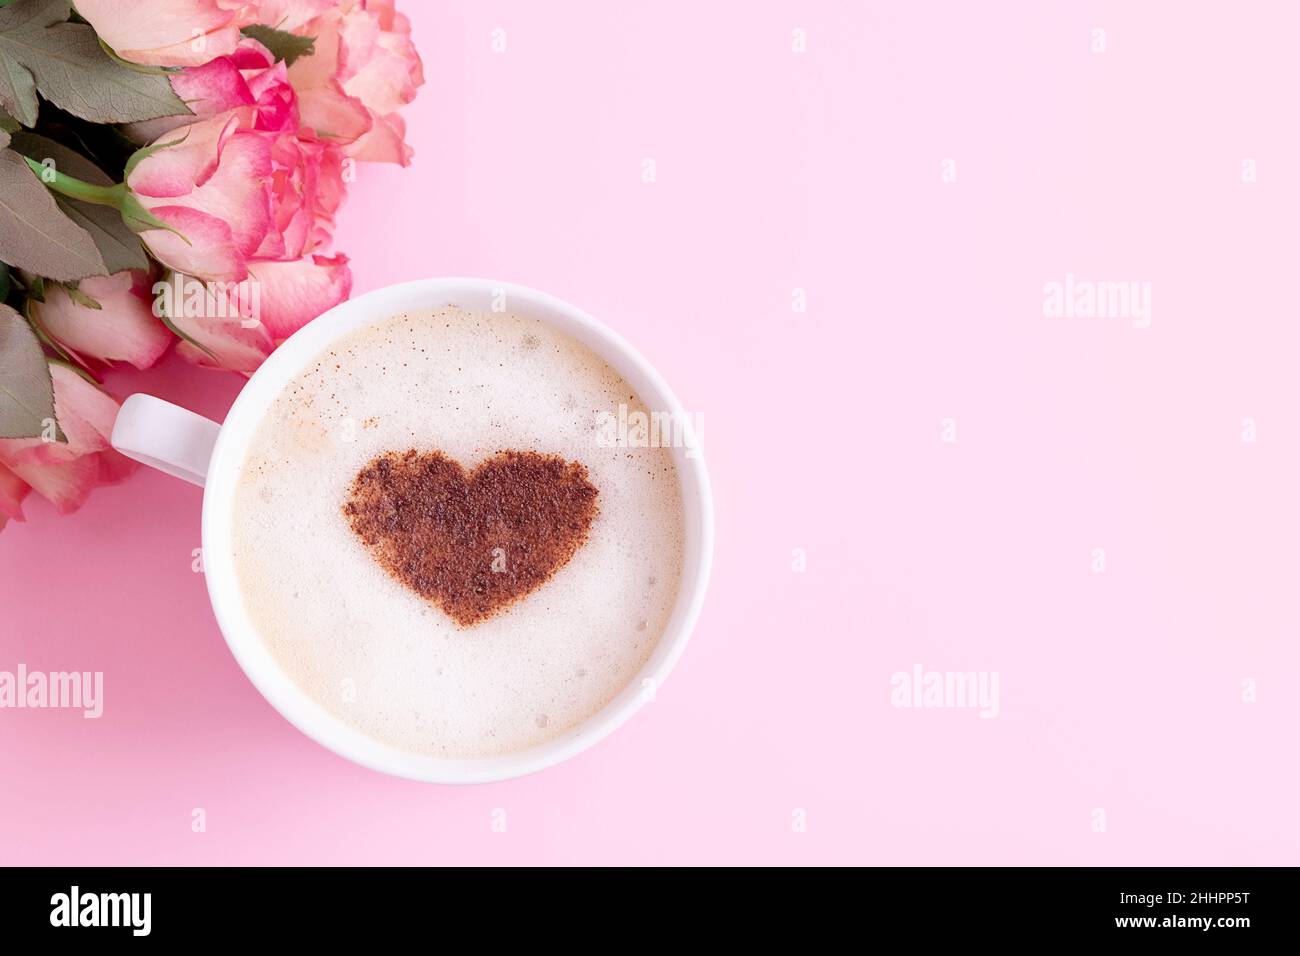 Coffee cup with a cinnamon heart on a milk foam with pink roses on pastel pink background, copy space Stock Photo